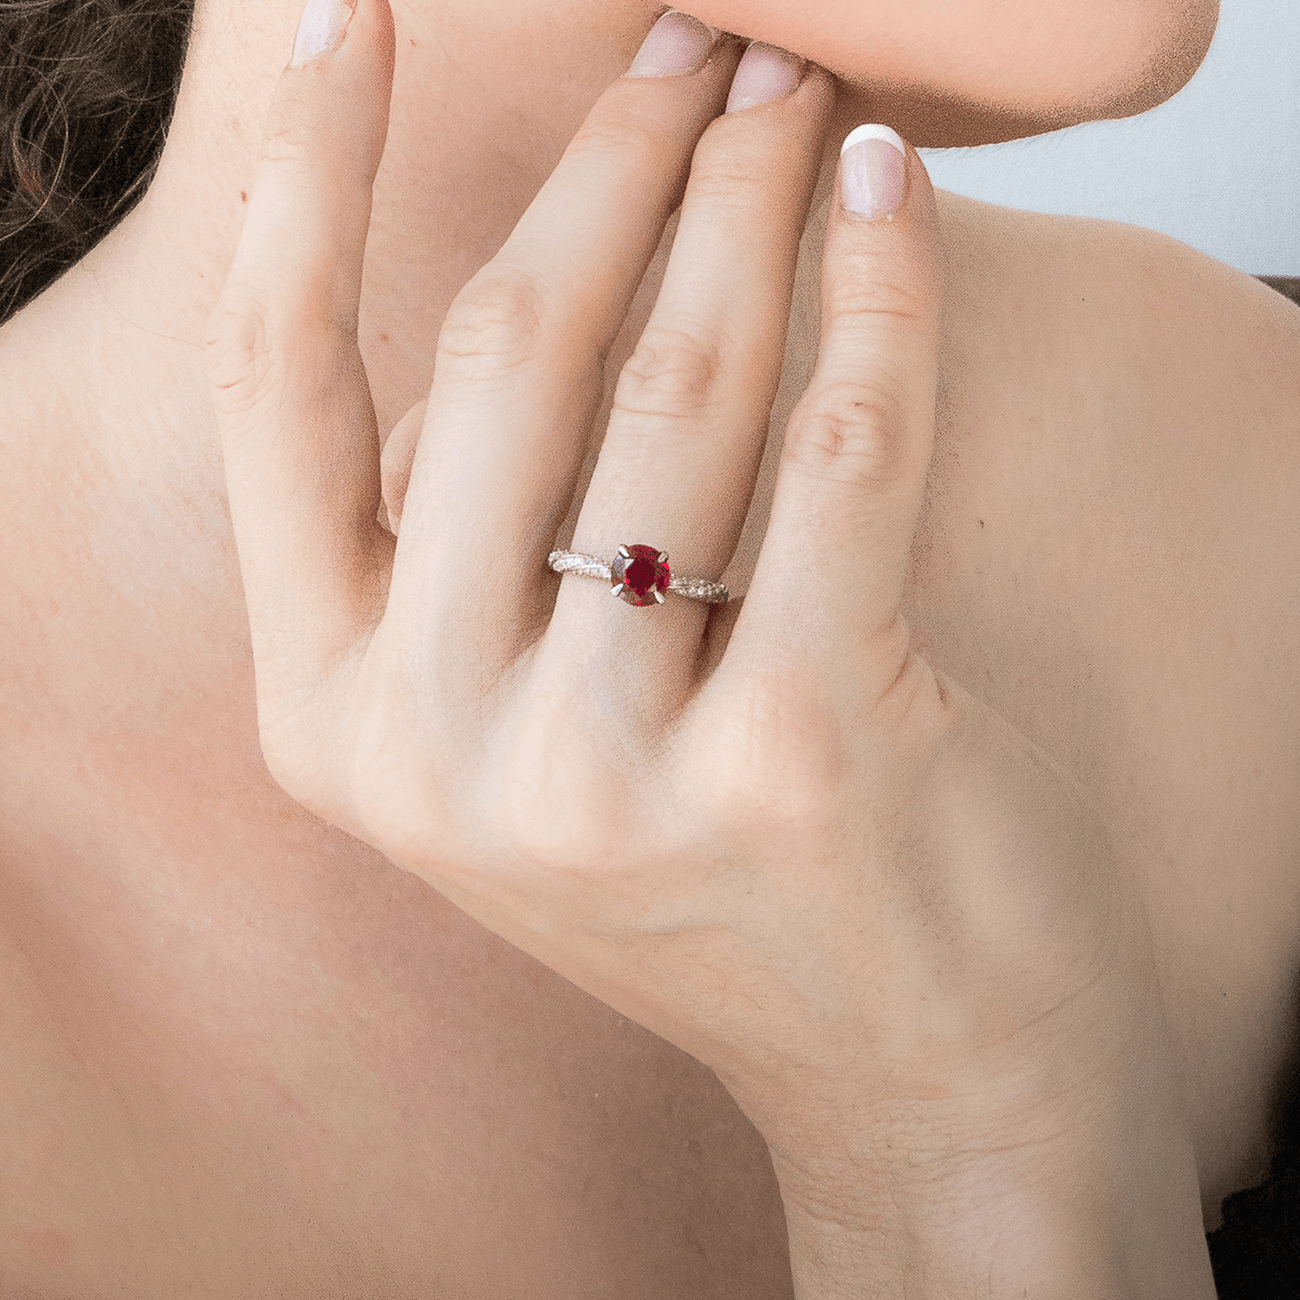 Discover more than 223 second hand ruby earrings